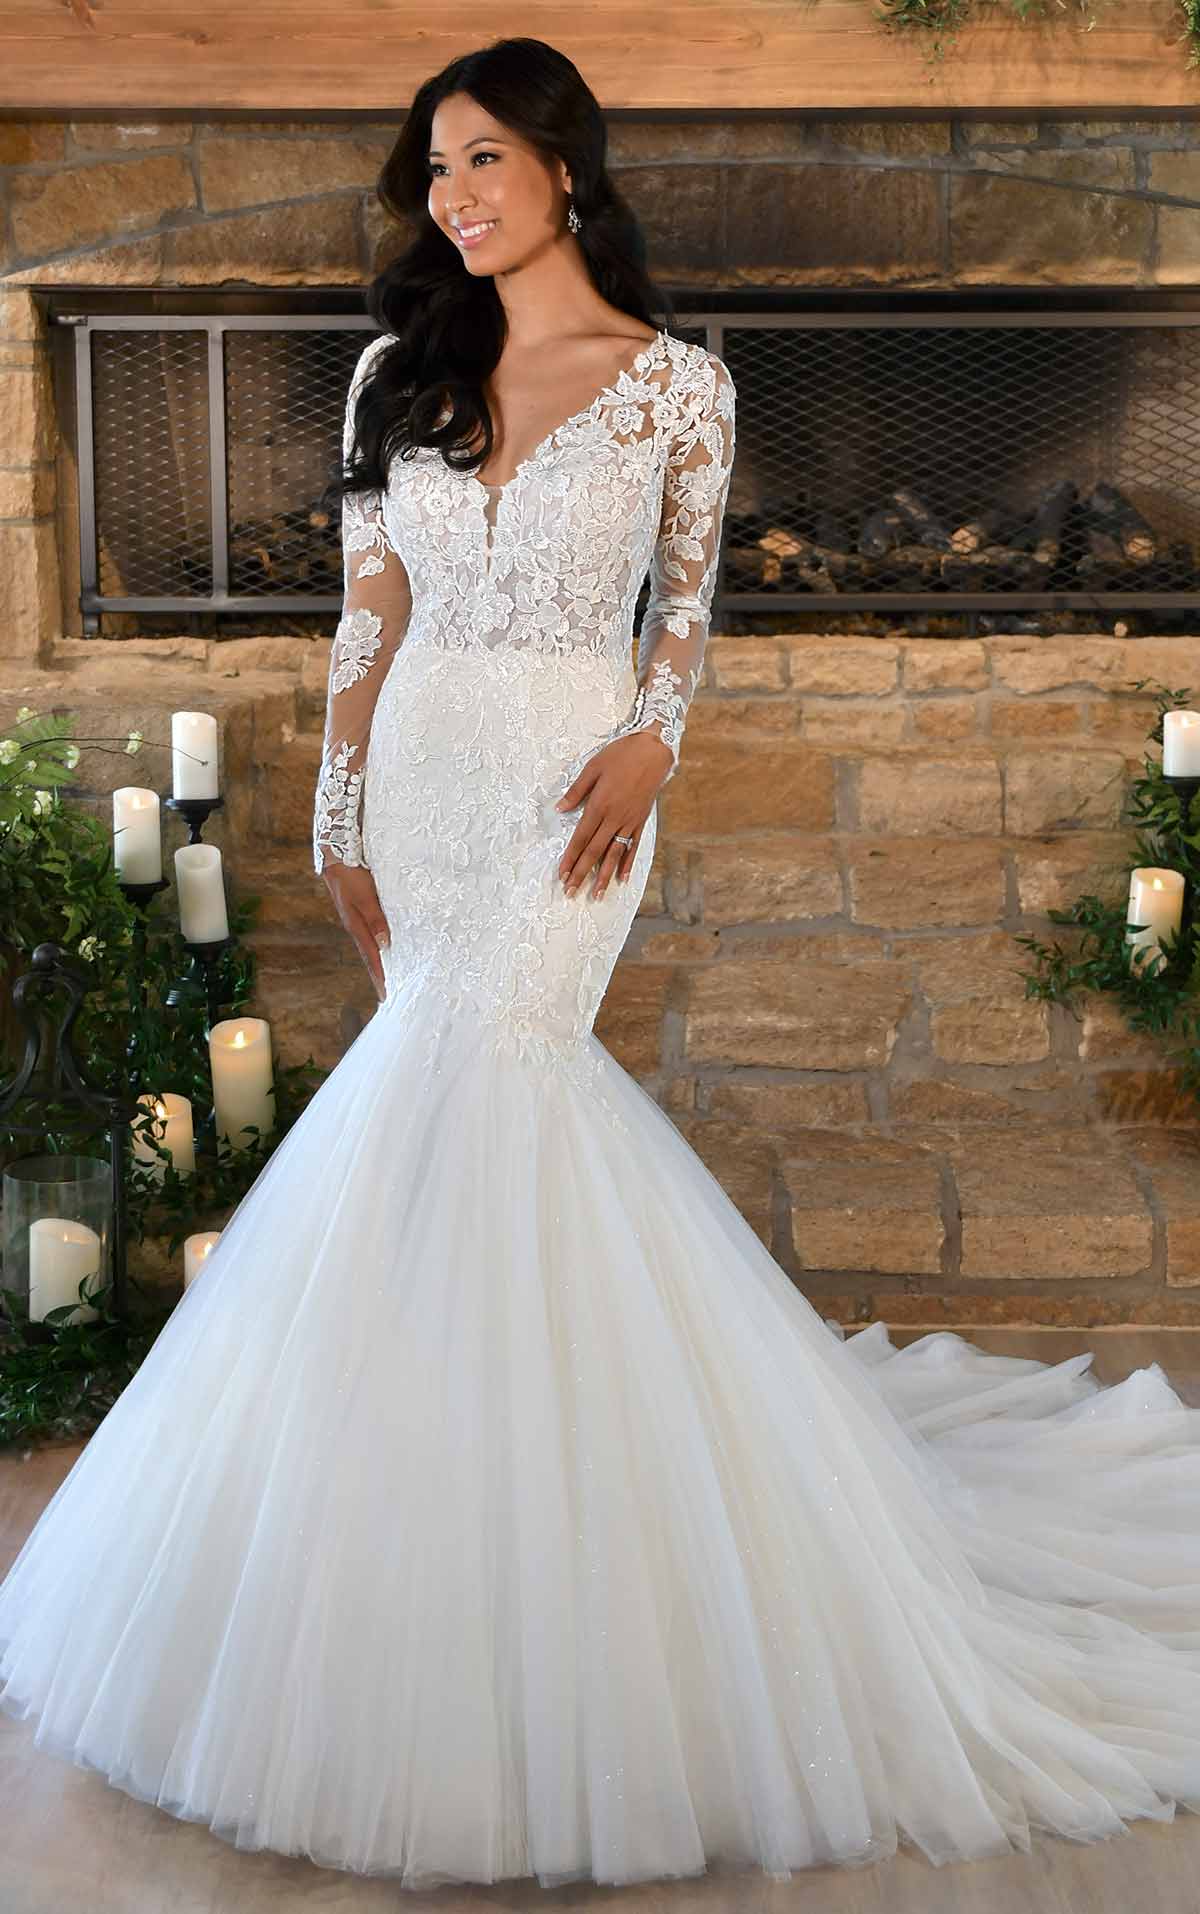 Classic fishtail wedding dress with floral lace 